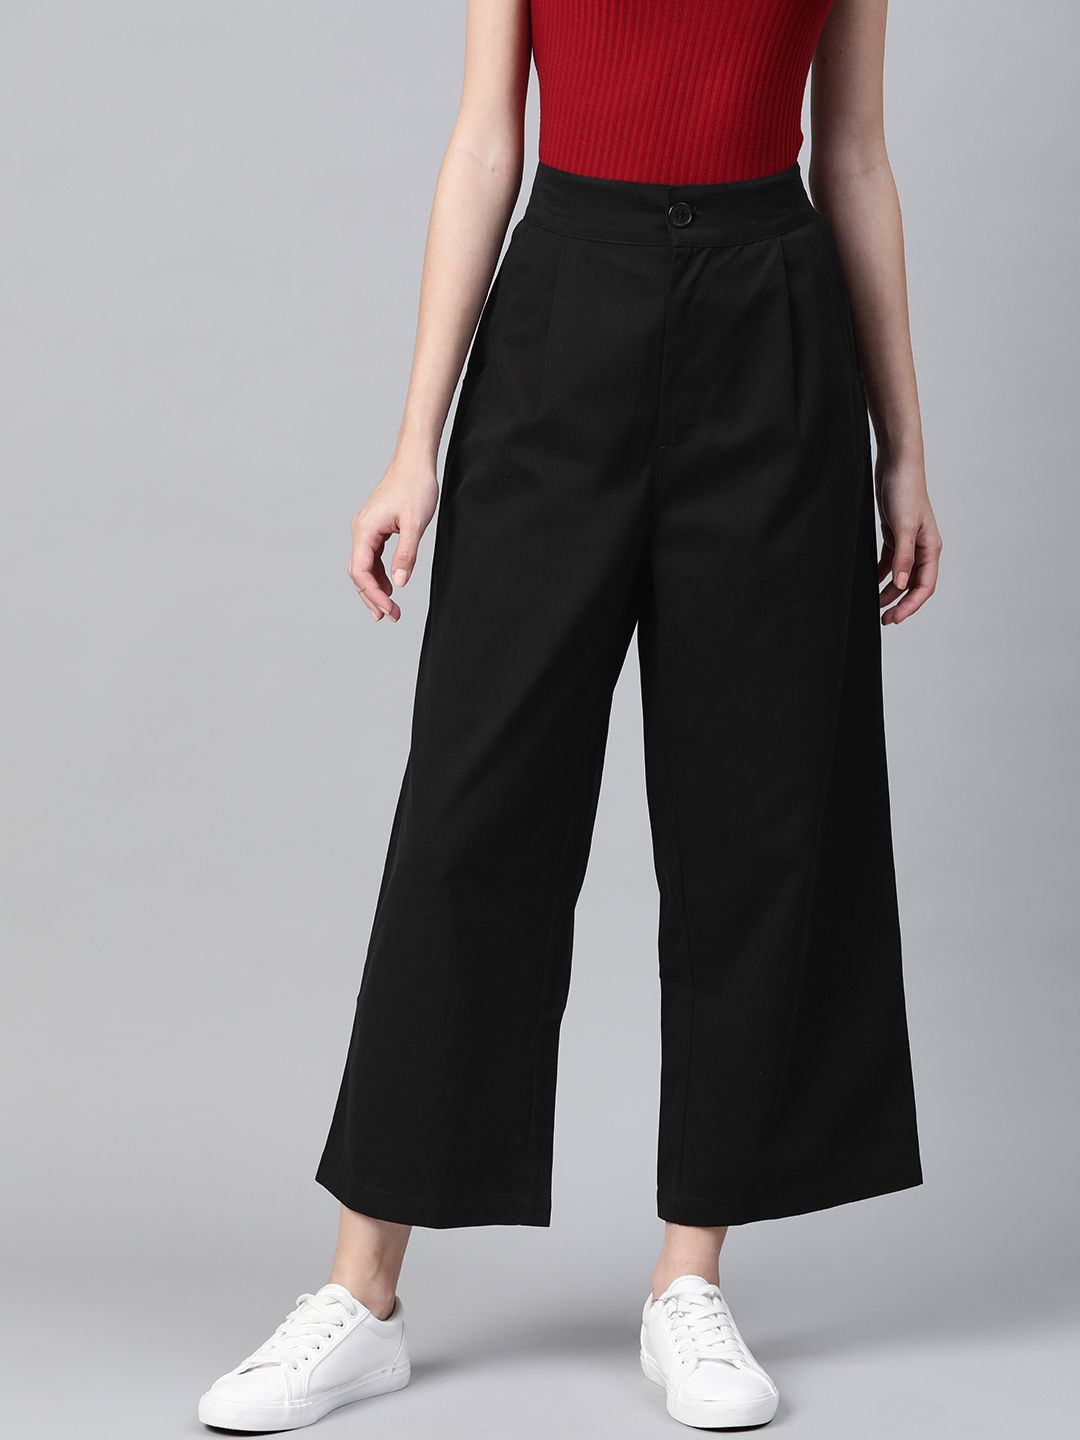 Popnetic Women Black Cotton Cropped Parallel Trousers Price in India